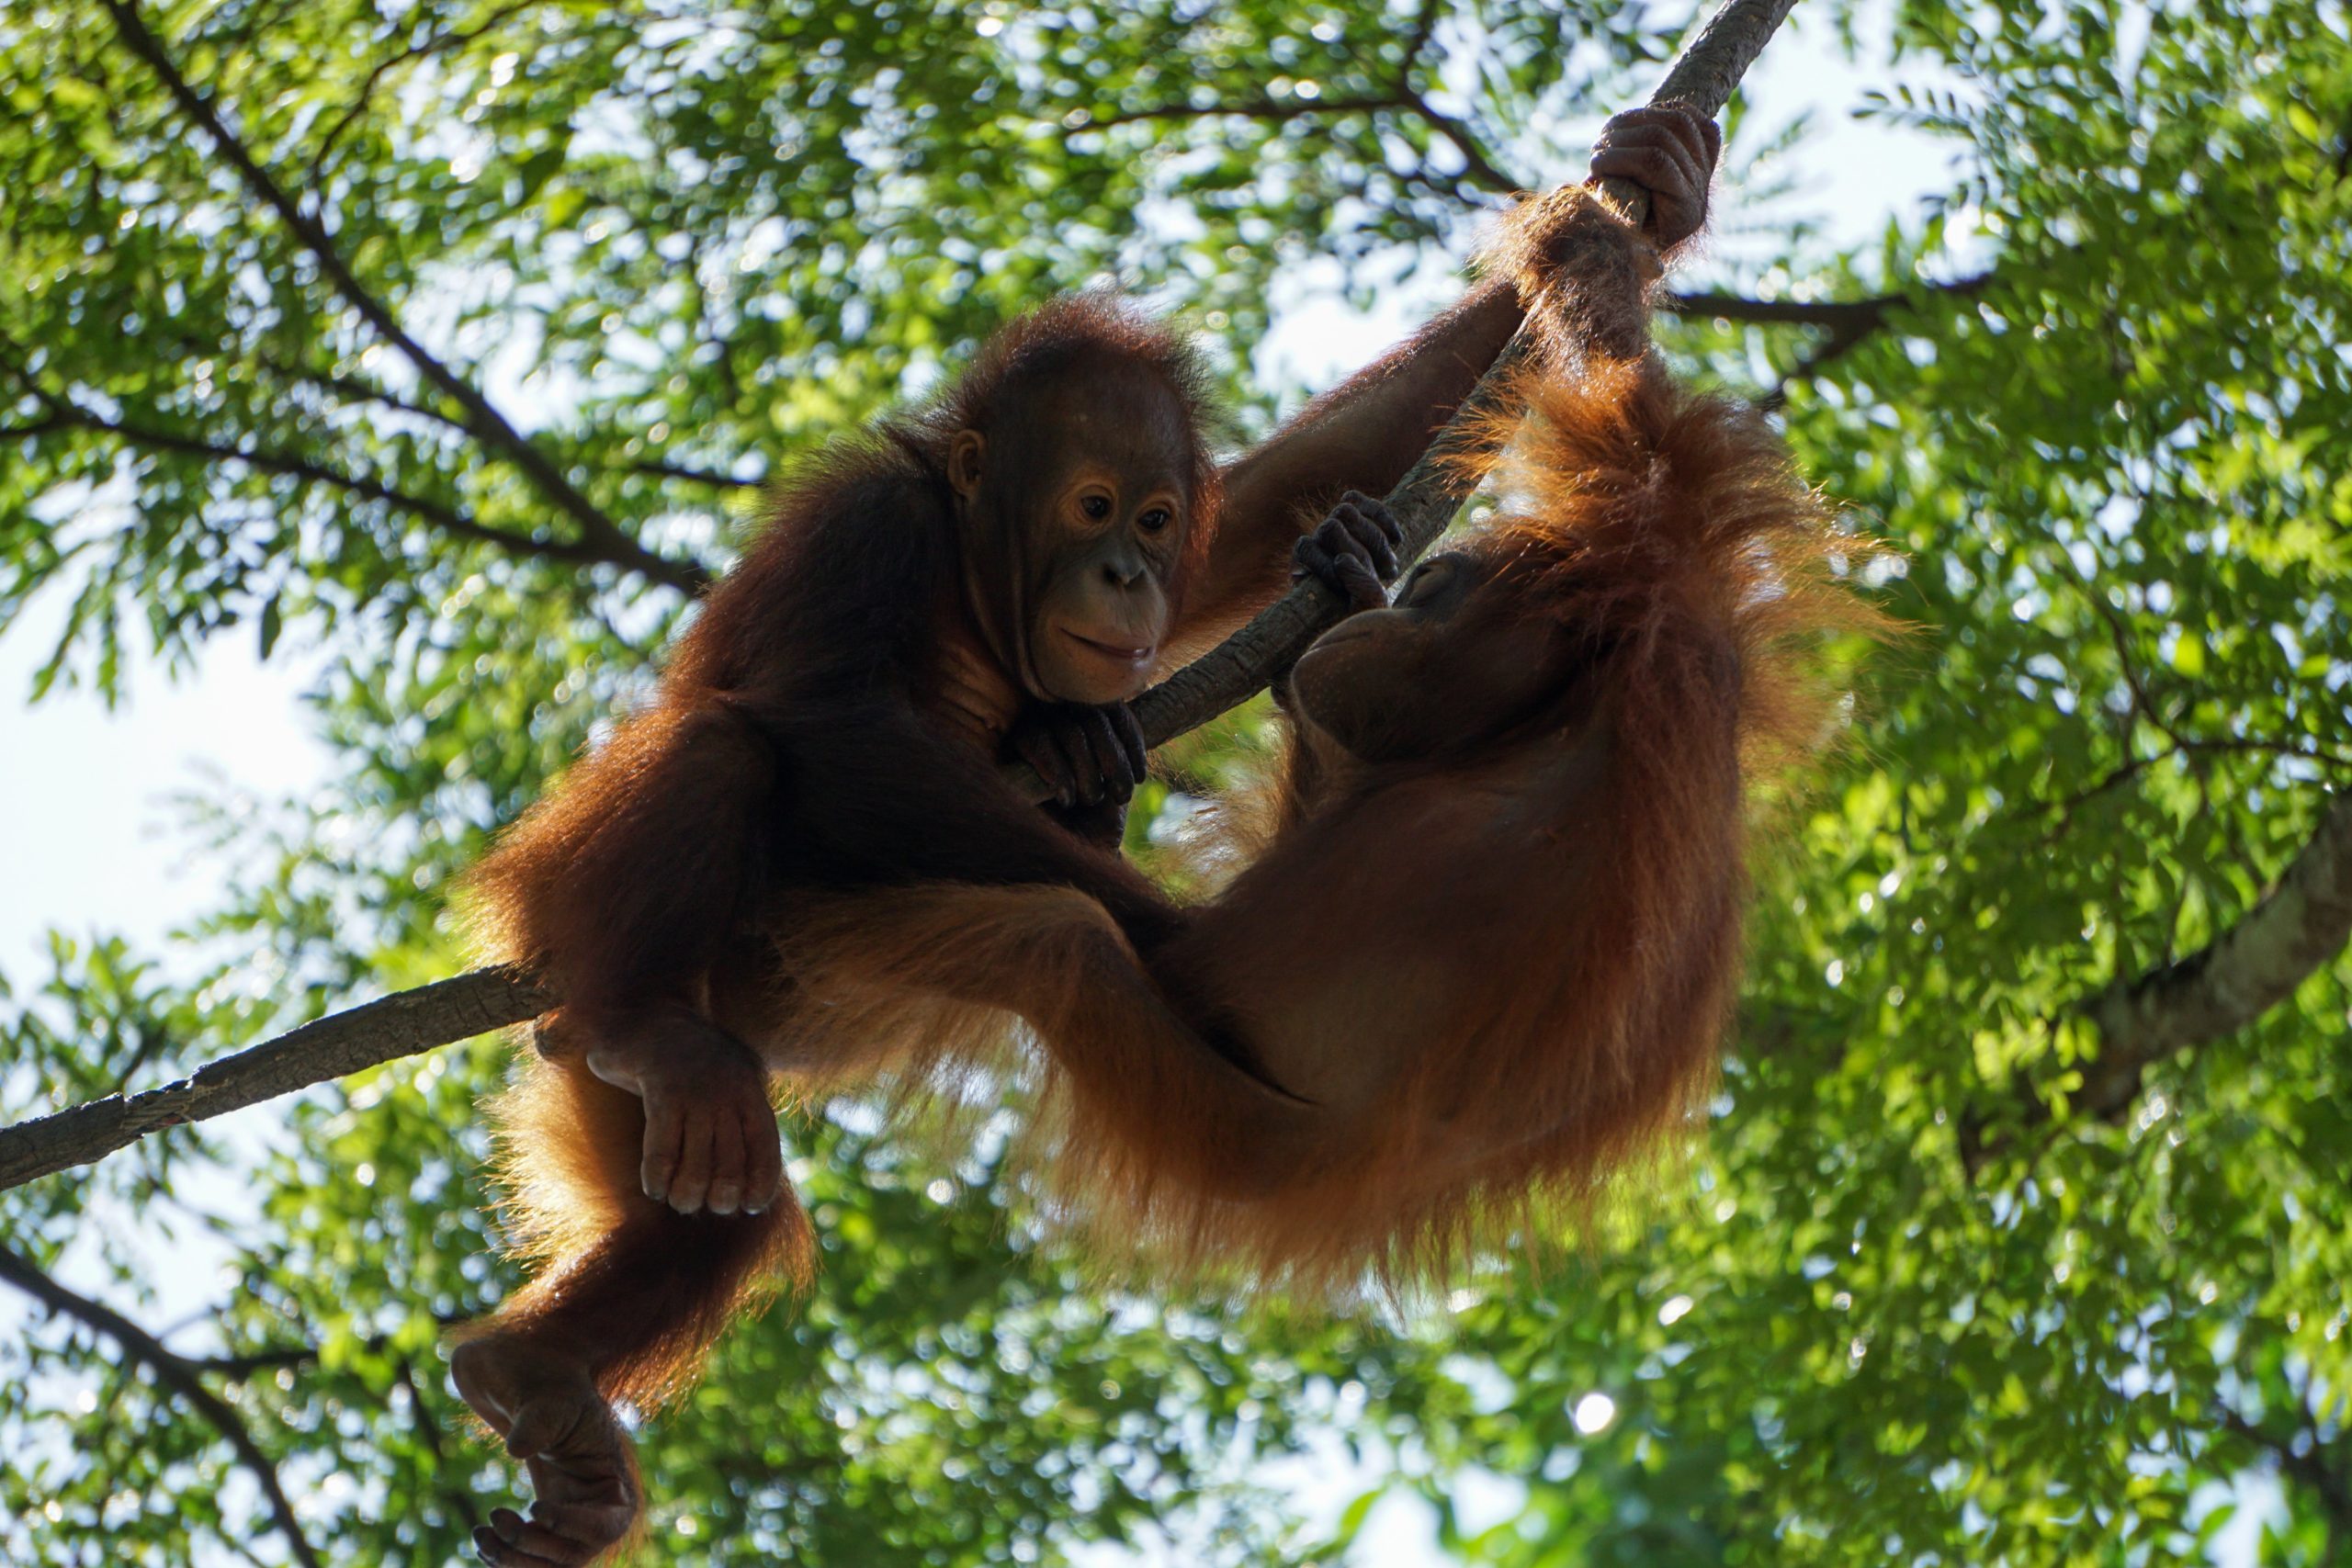 Visit these islands to see orangutans.